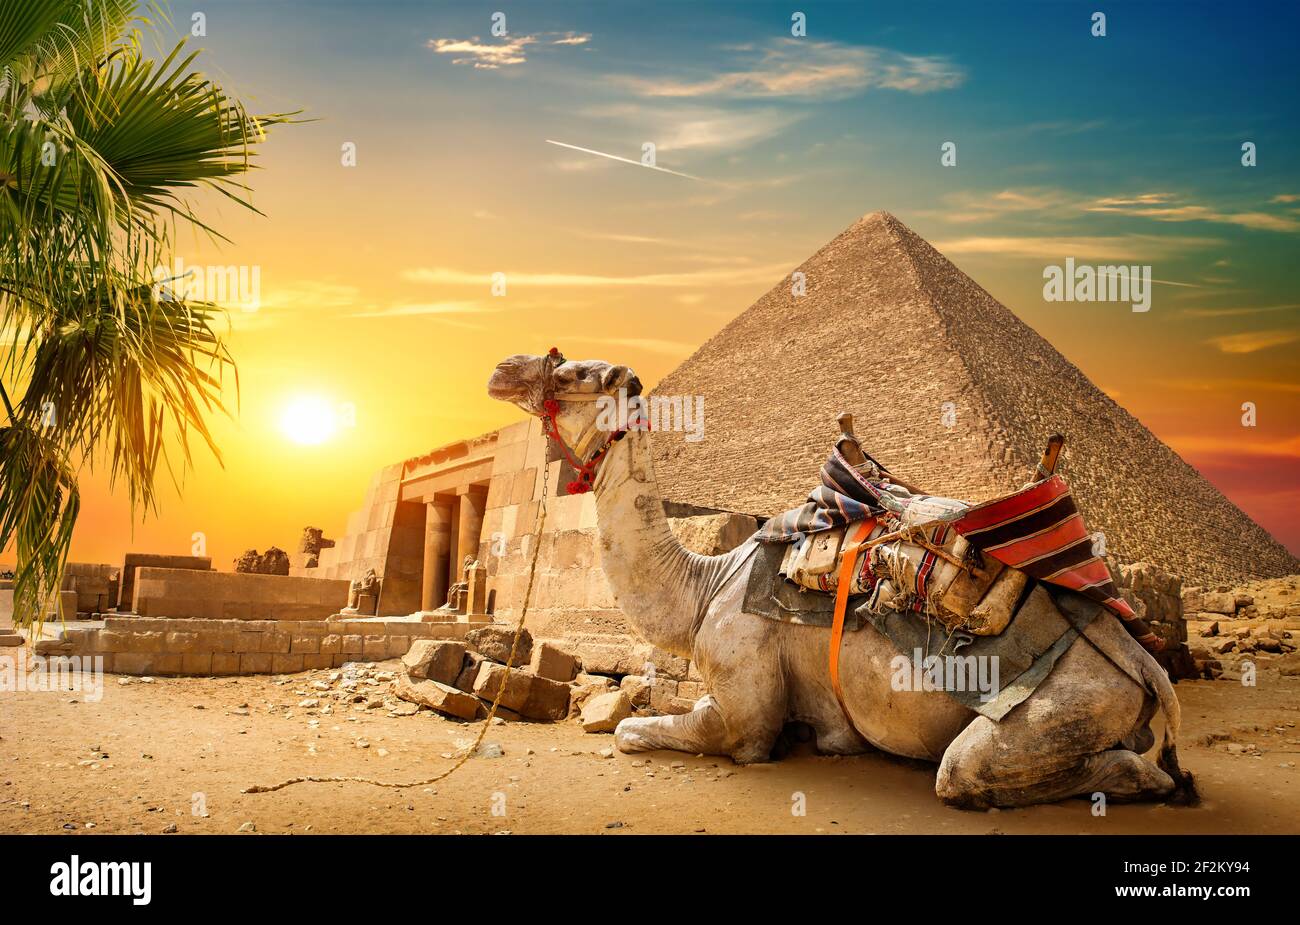 Camel rests near ruins pyramid of Egypt Stock Photo